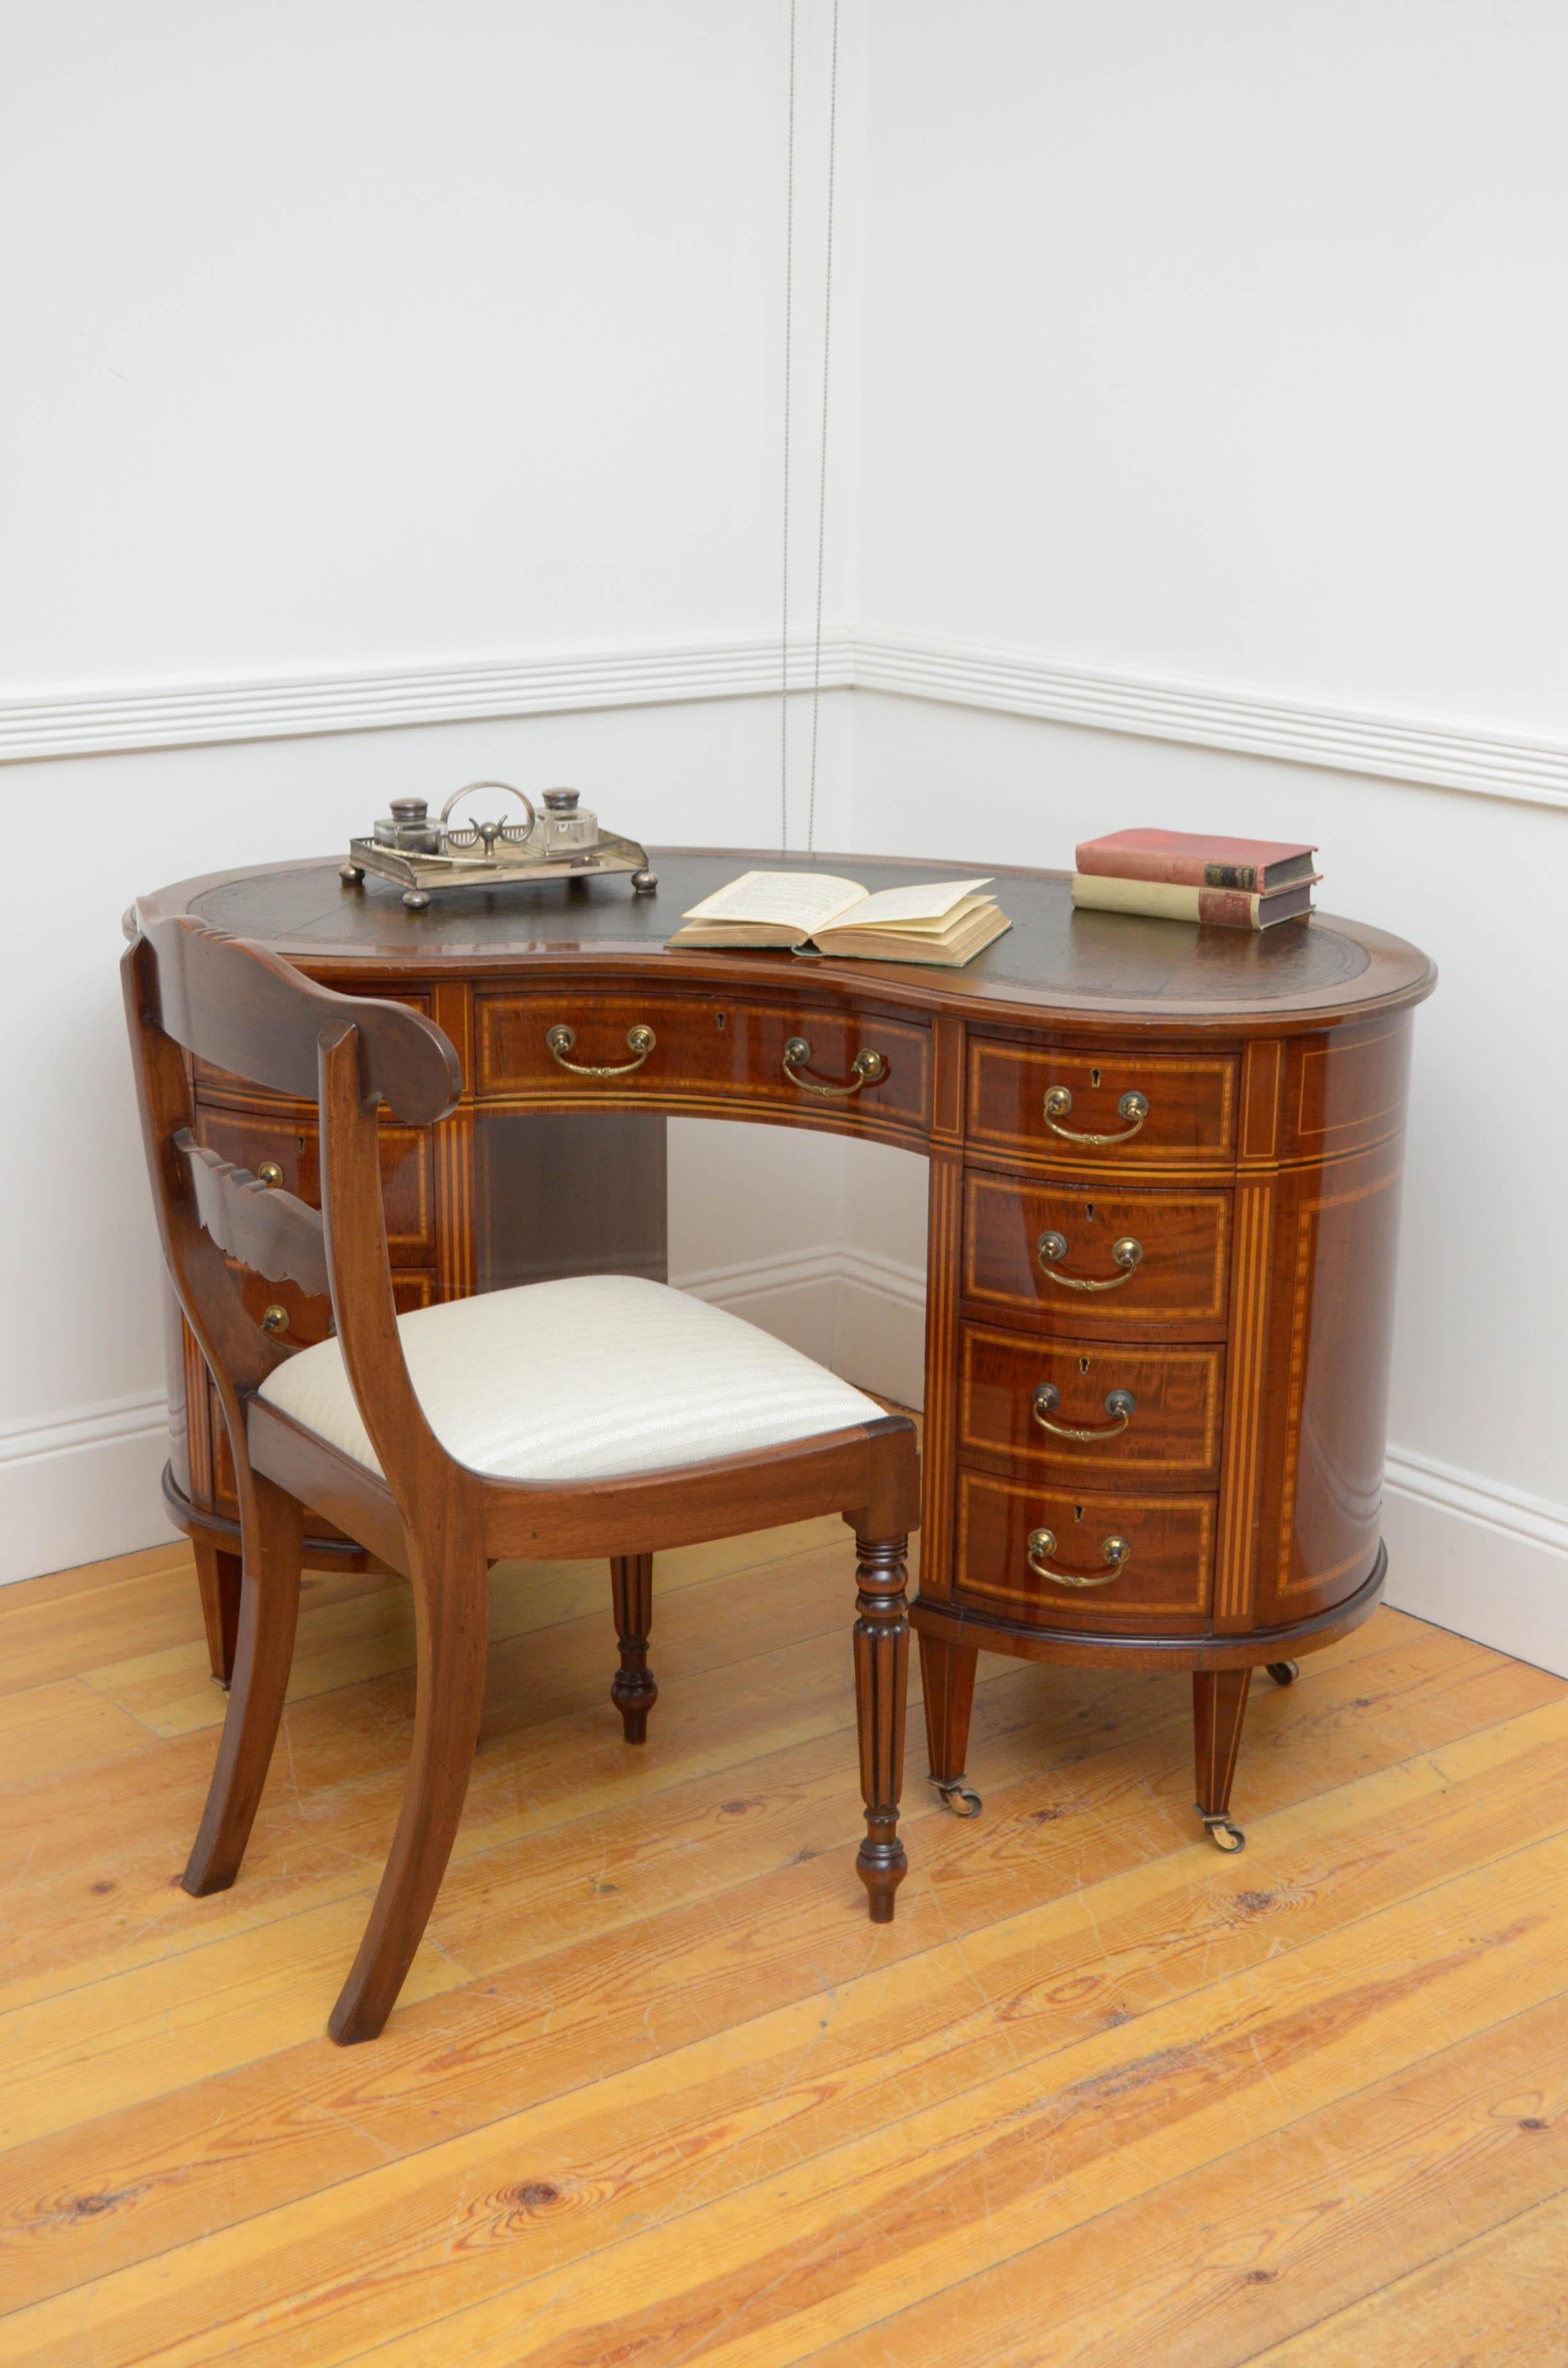 Sn4703 fine quality Edwardian, mahogany, kidney shaped writing desk, having tooled leather writing surface, above a concave centre drawer flanked by 8 satinwood crossbanded and mahogany lined, graduated drawers fitted with brass handles, all